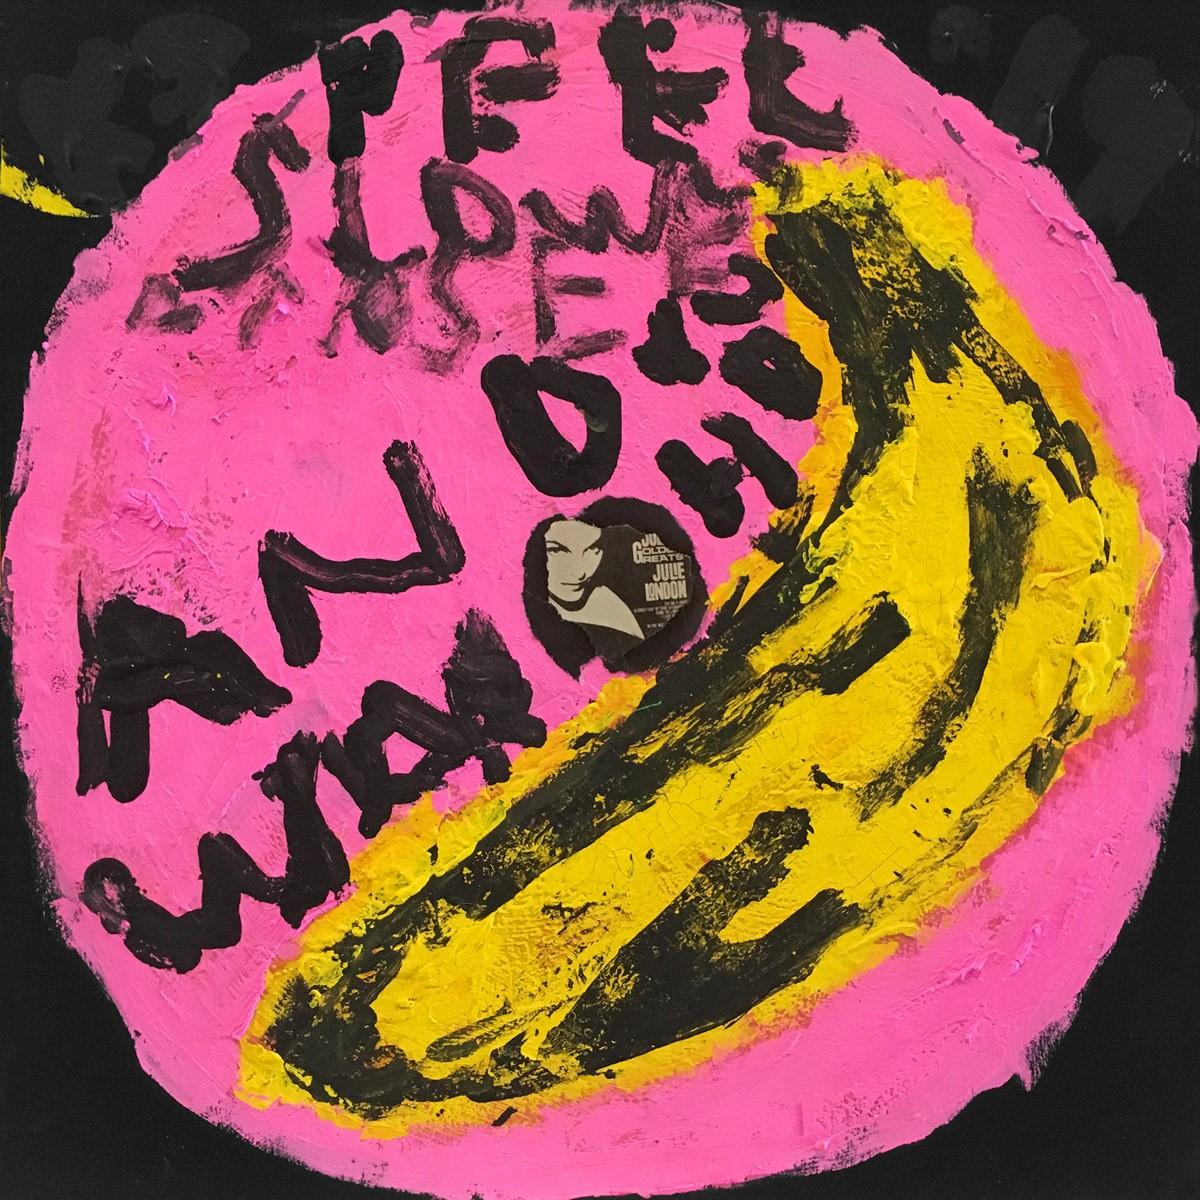 Kerry Smith Figurative Painting - Andy Warhol And The Velvet Underground - Peel Slowly And See (Grammy, Pop Art)